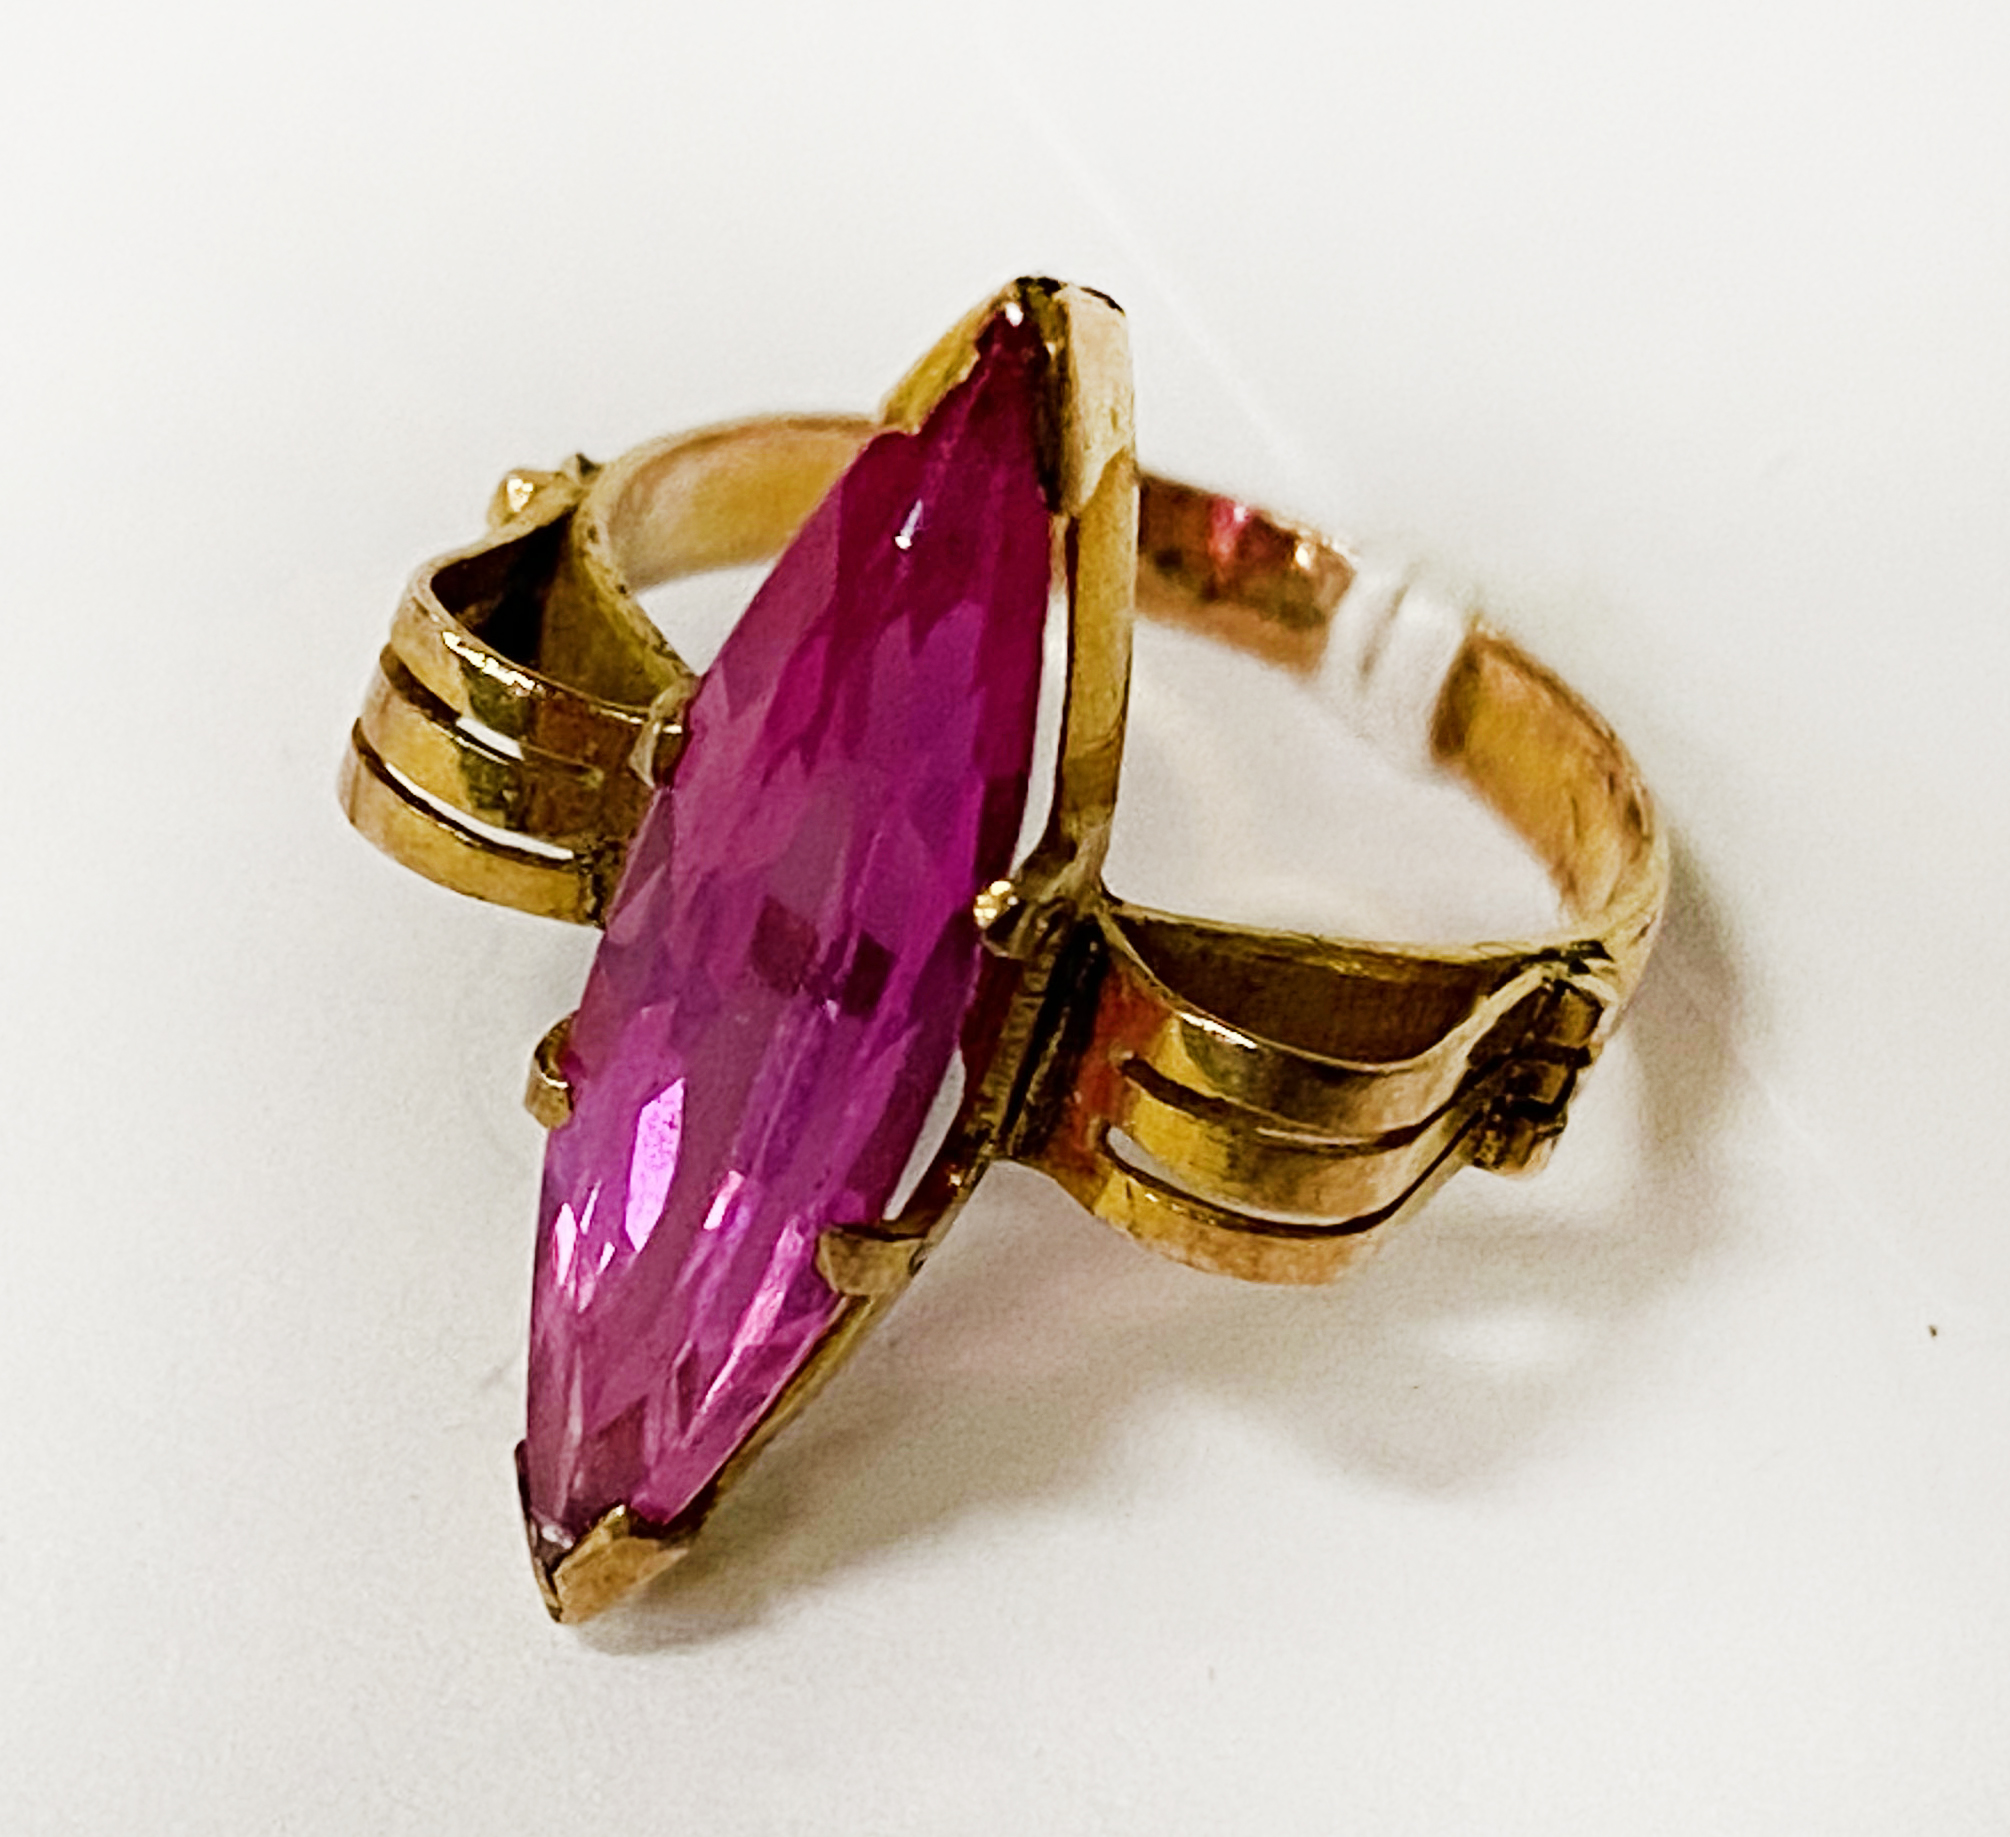 12CT GOLD PINK SAPPHIRE RING - SIZE H / I